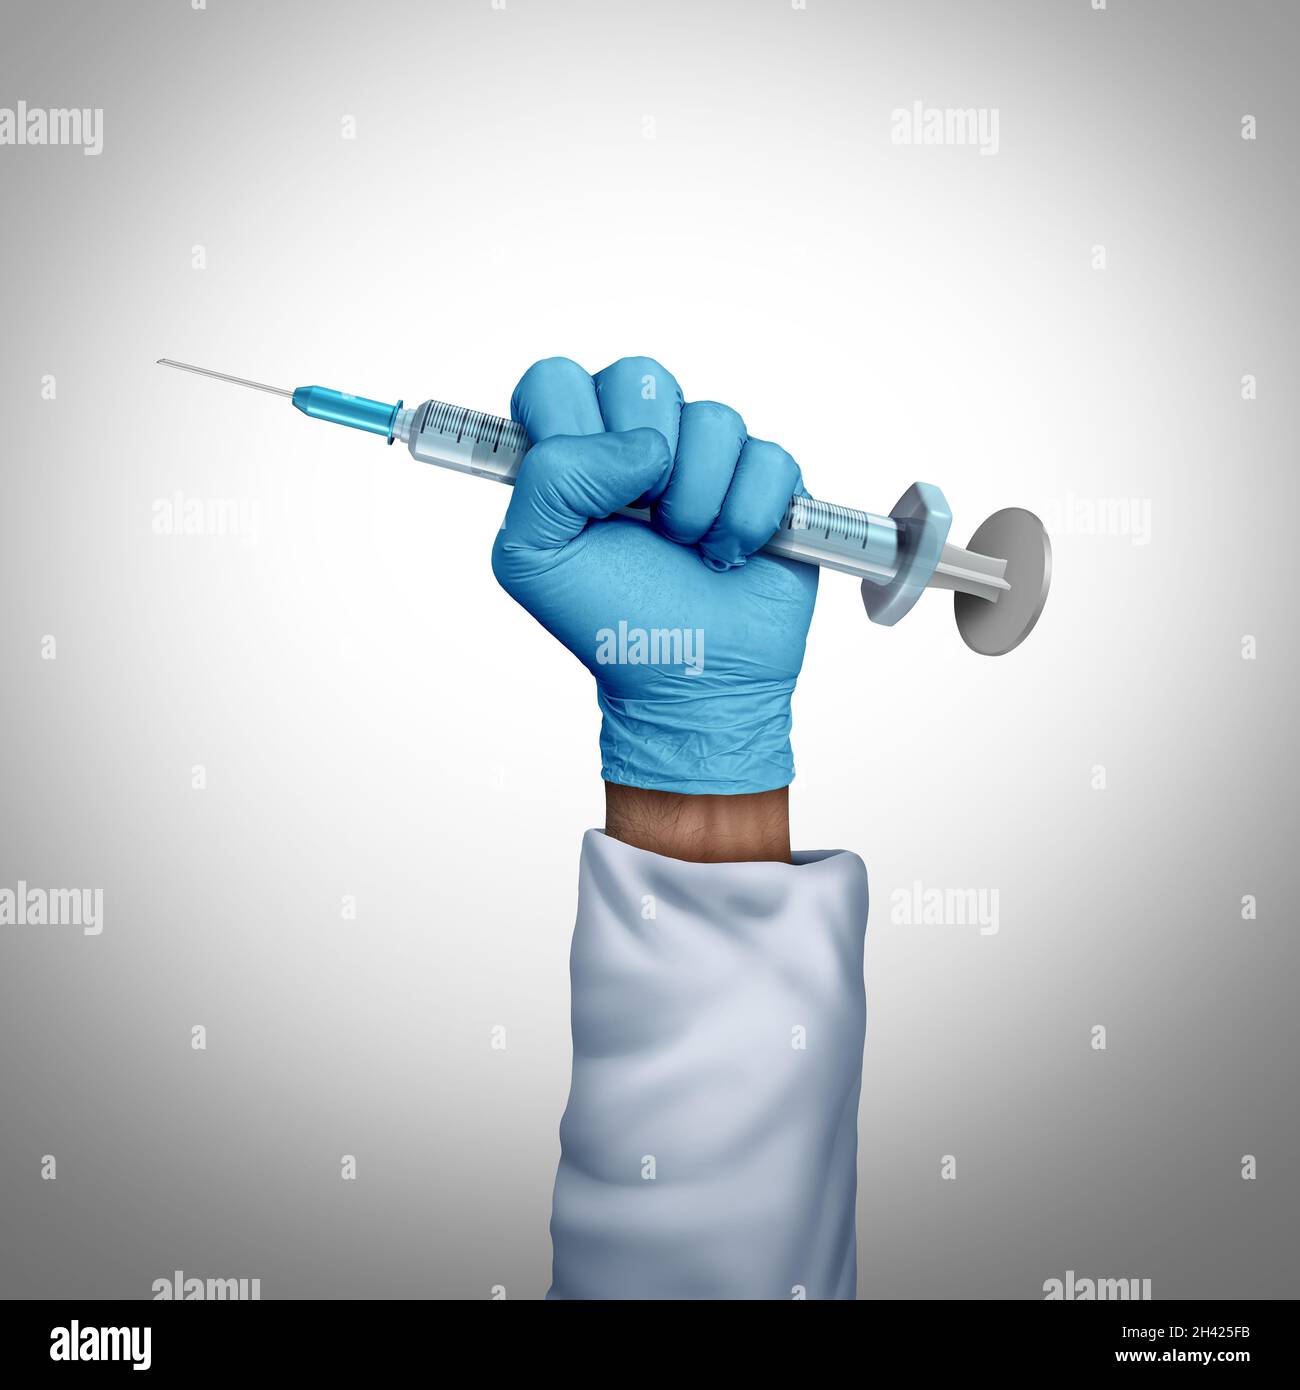 Power of medicine and medical social justice concept and Virus vaccinefor flu or coronavirus disease control as a doctor with a surgical glove. Stock Photo